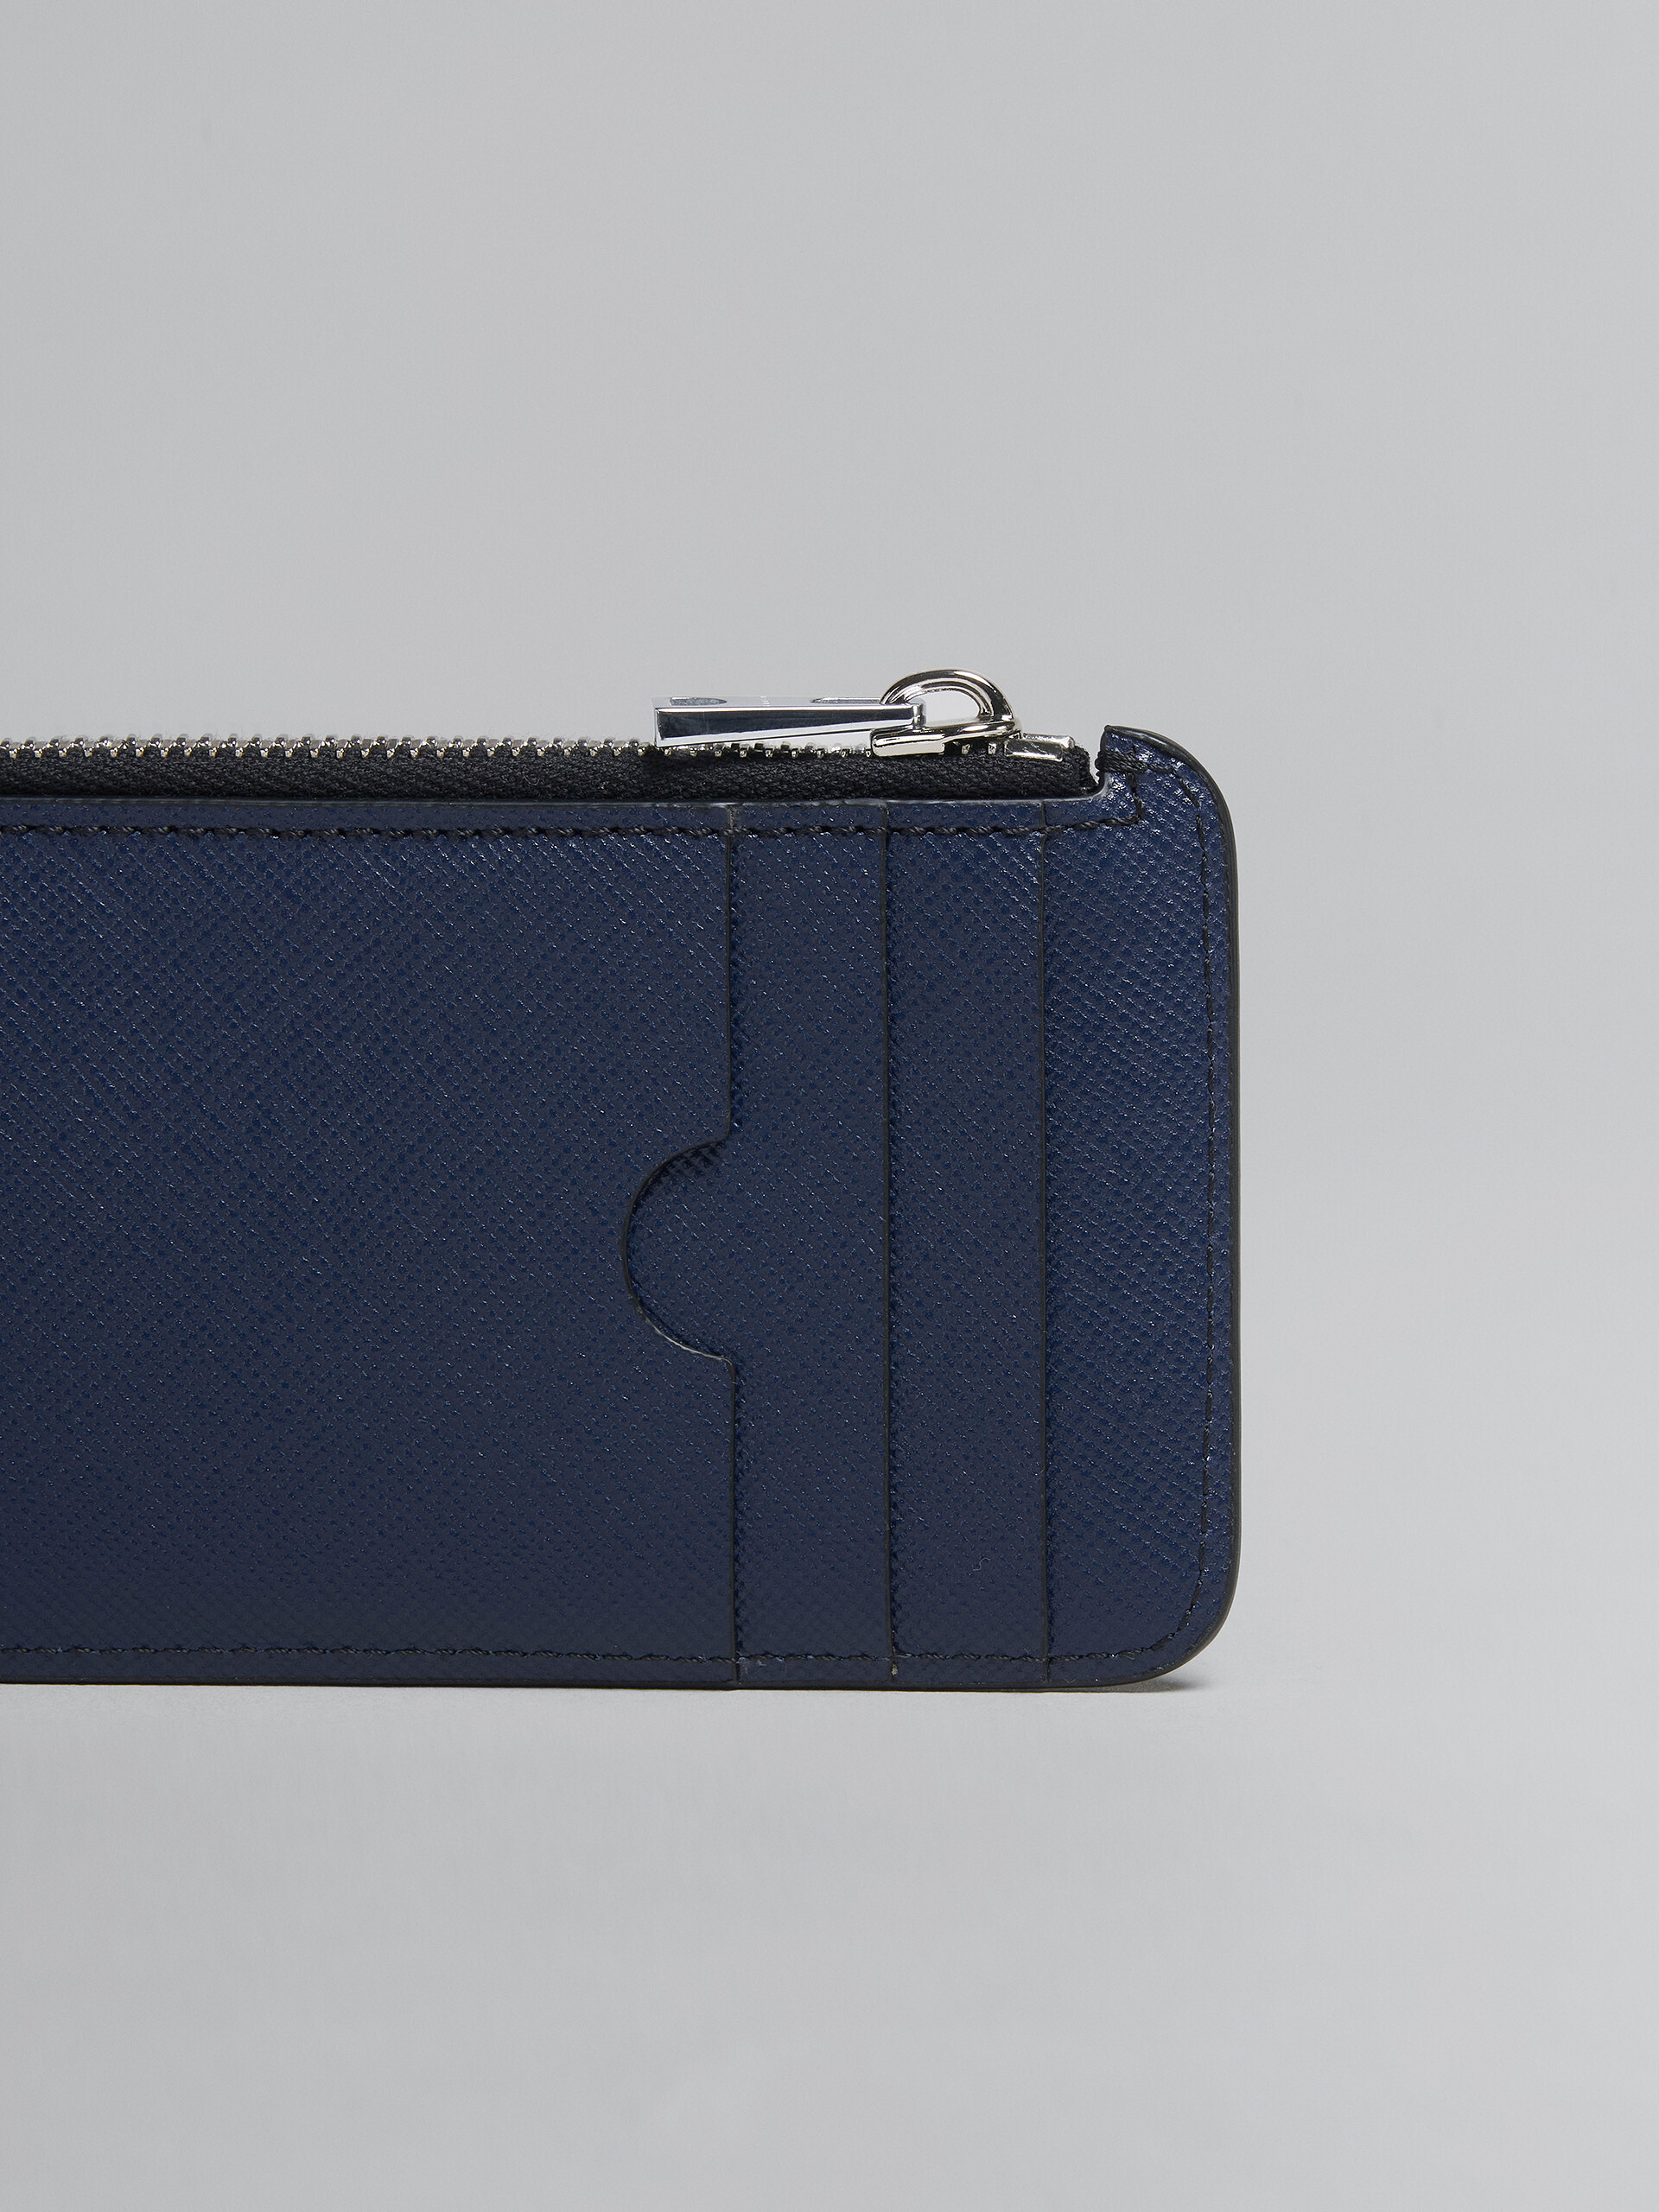 Blue and black saffiano leather zip-around card case - Wallets - Image 4